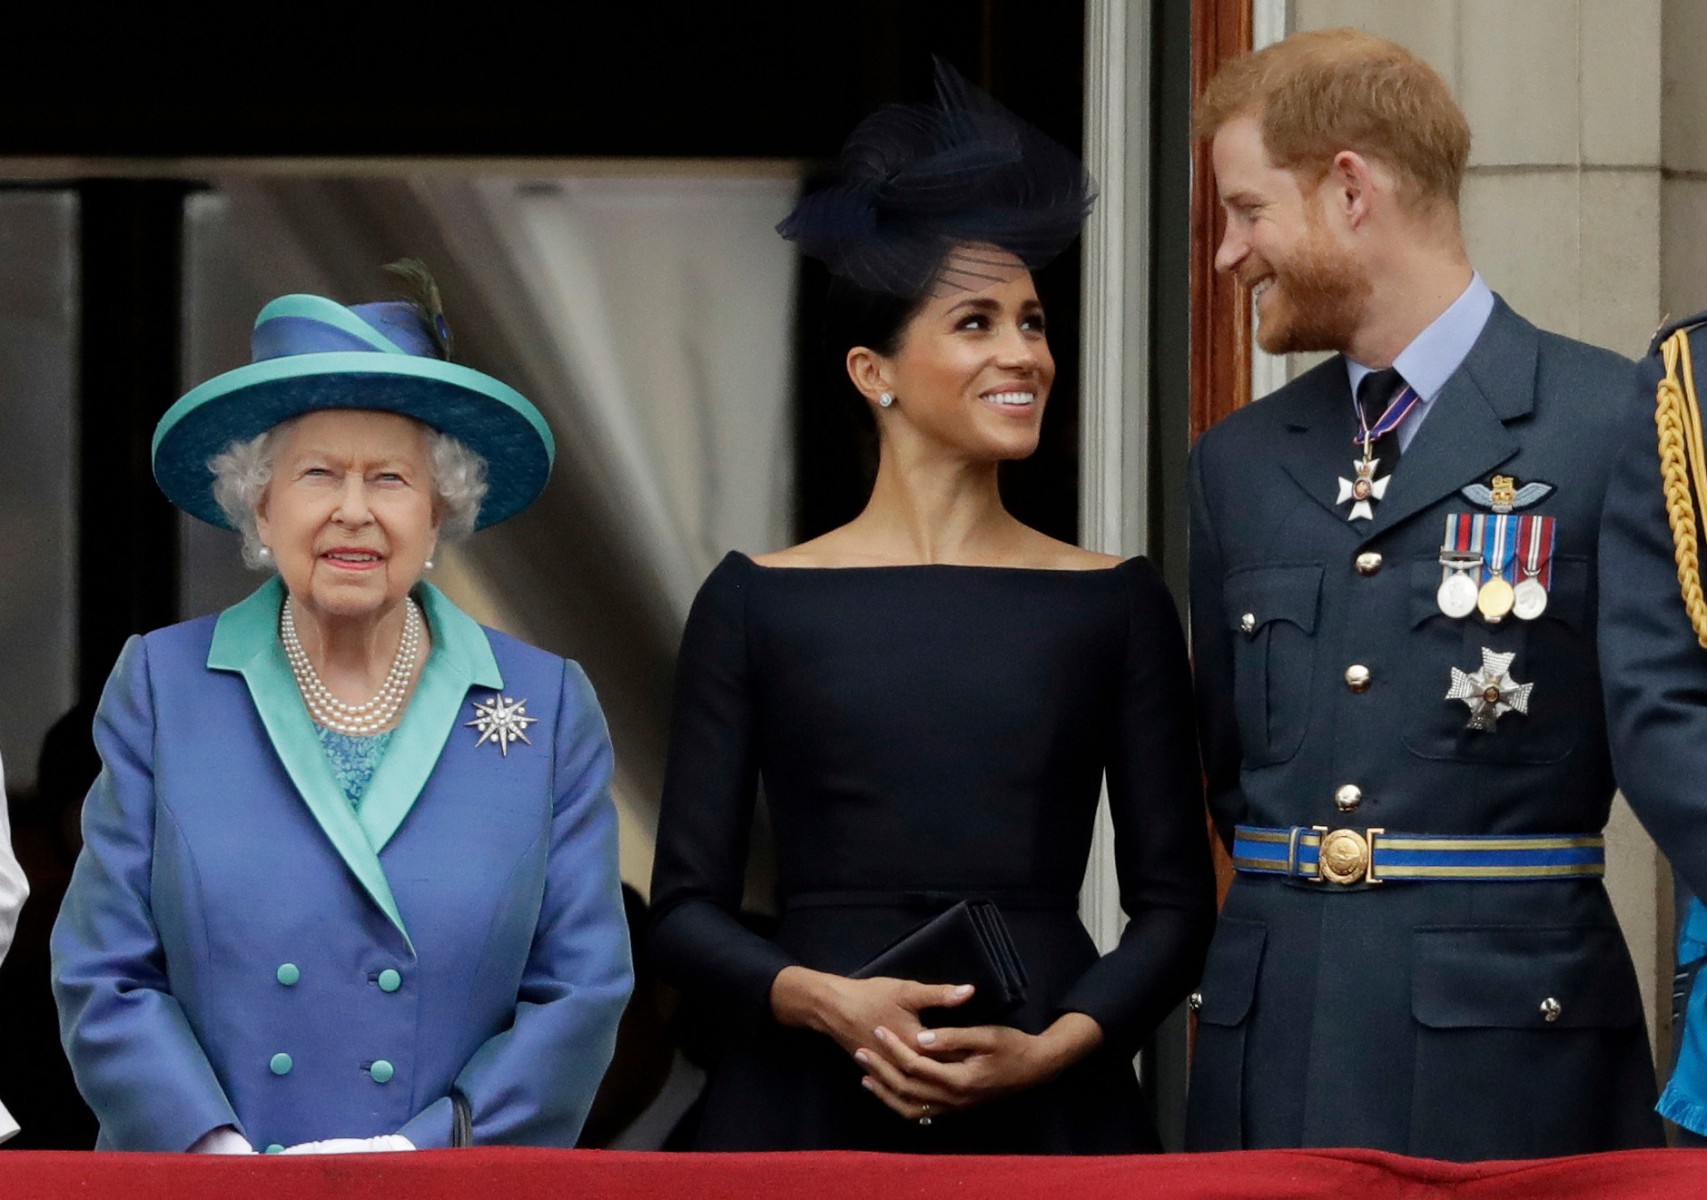 The couple spoke with the Queen after announcing they were quitting